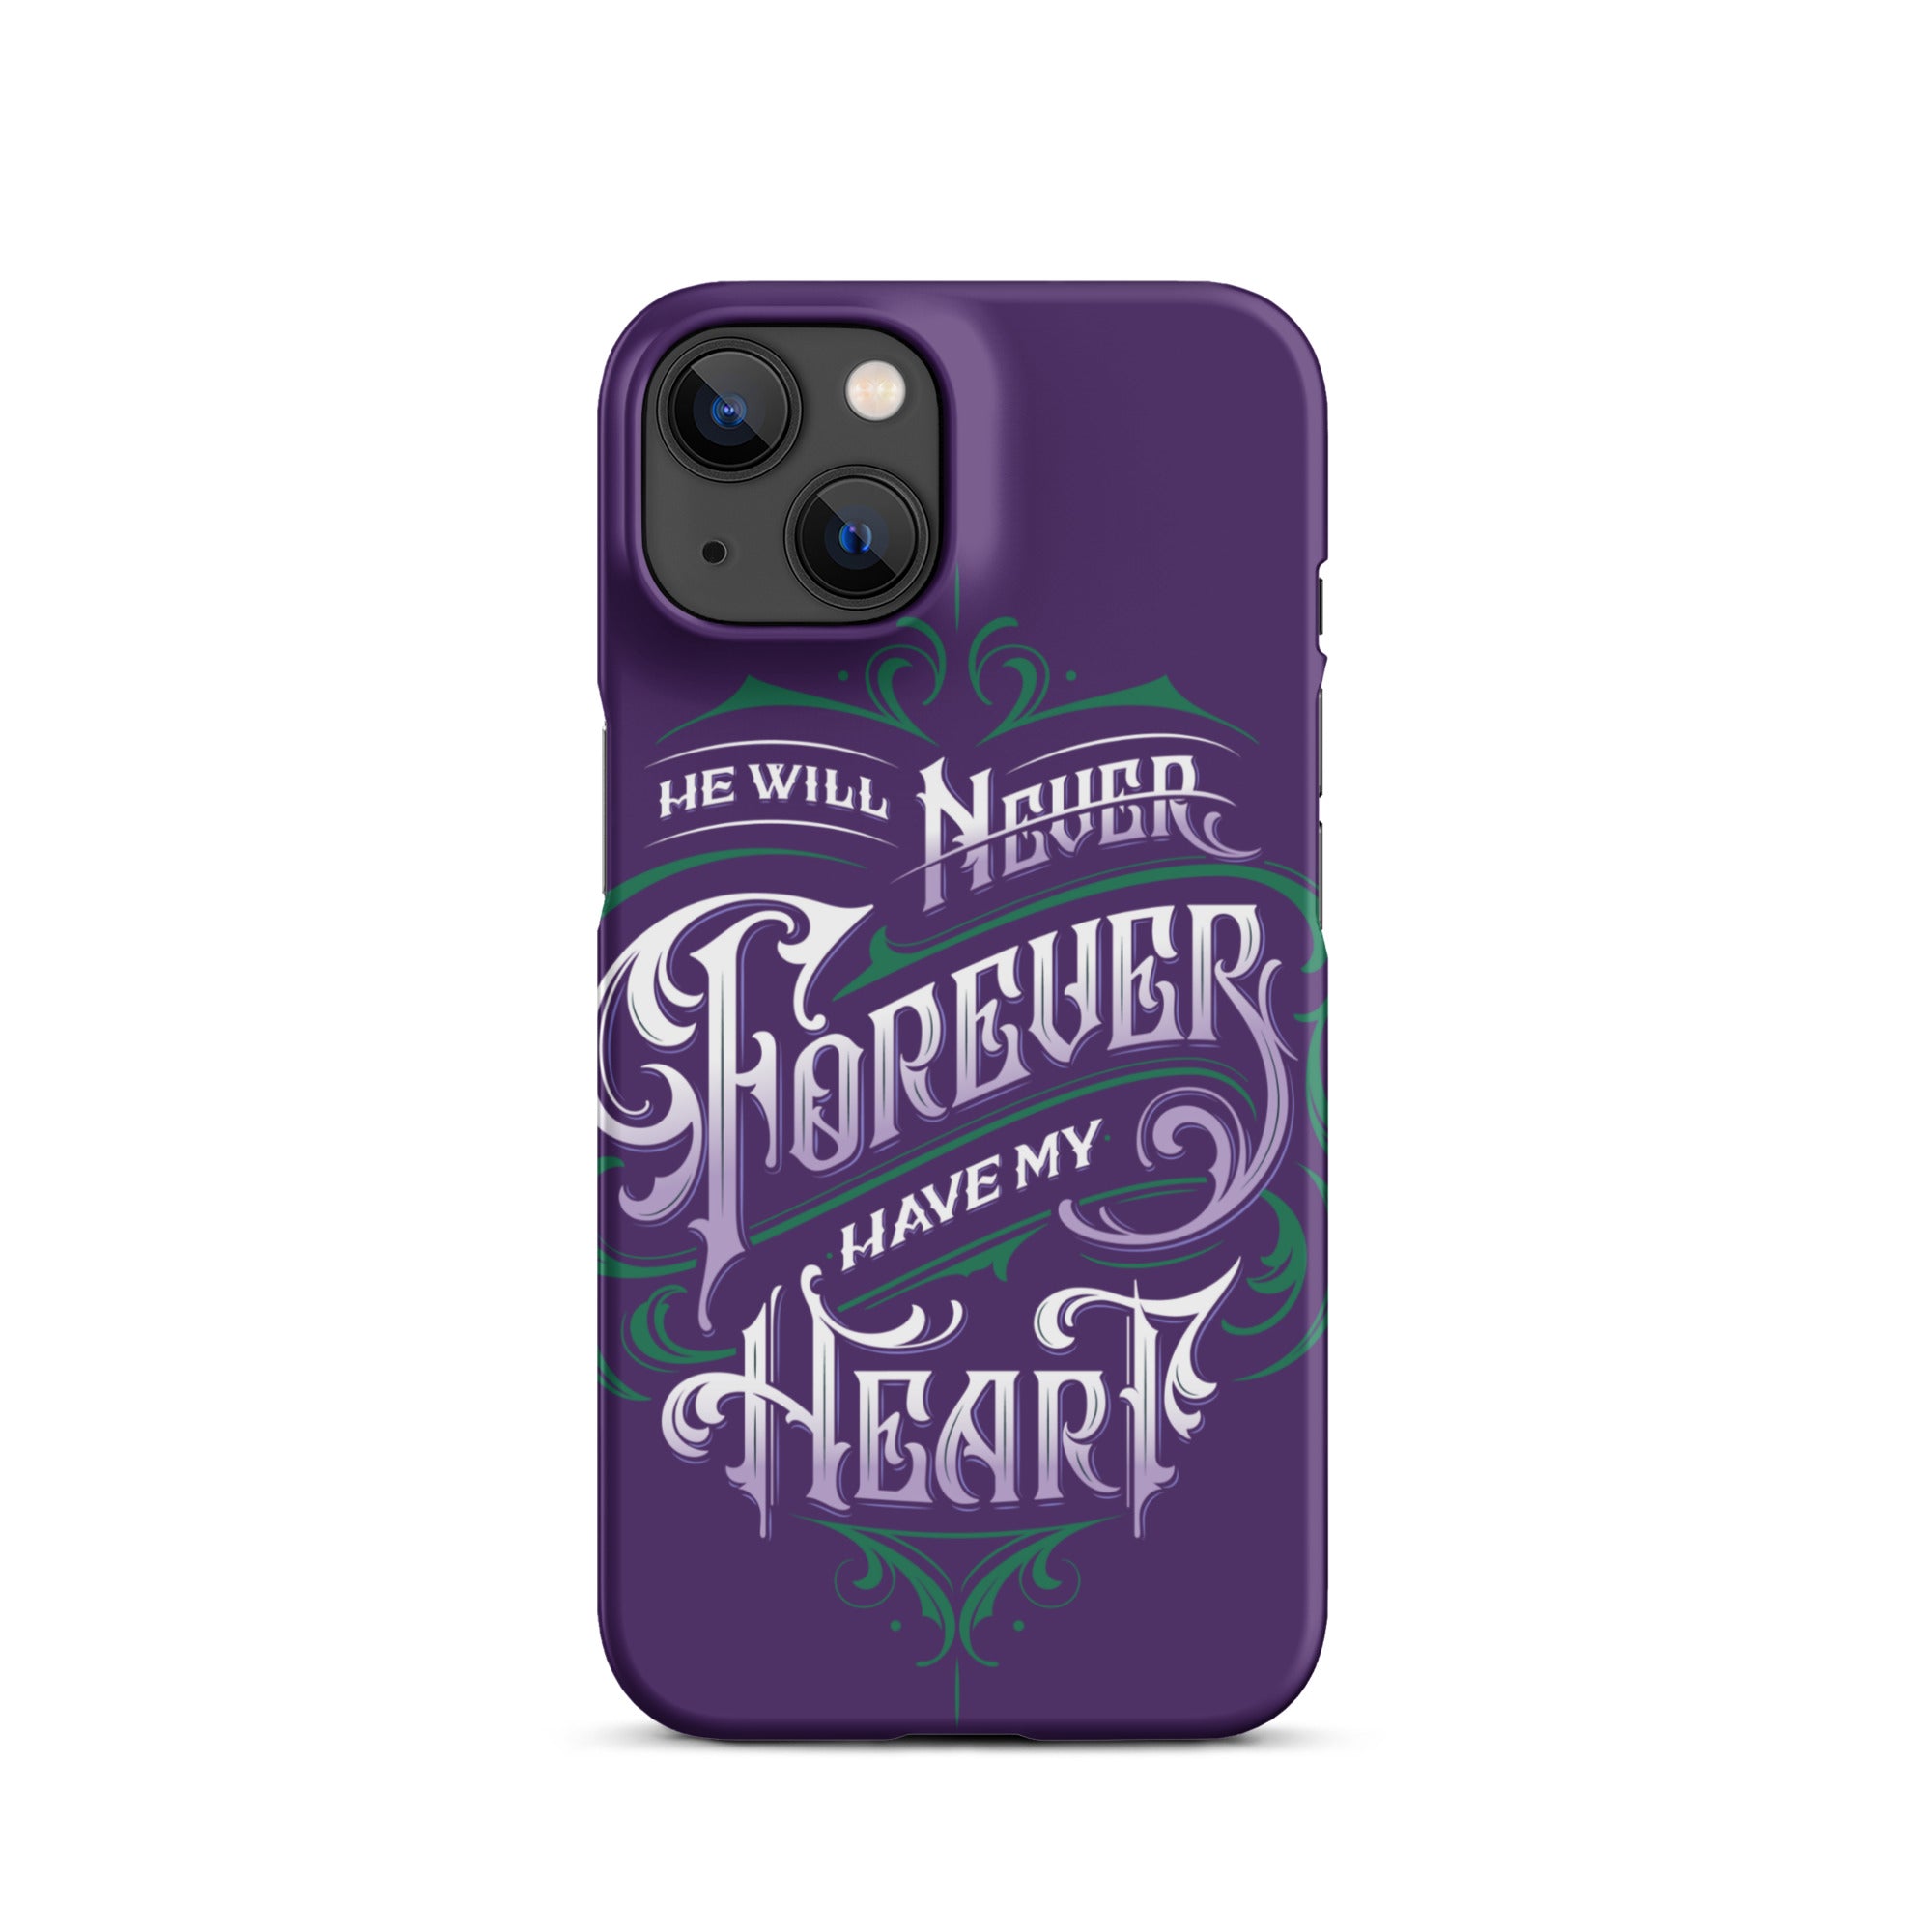 "He will never have my heart" iPhone case